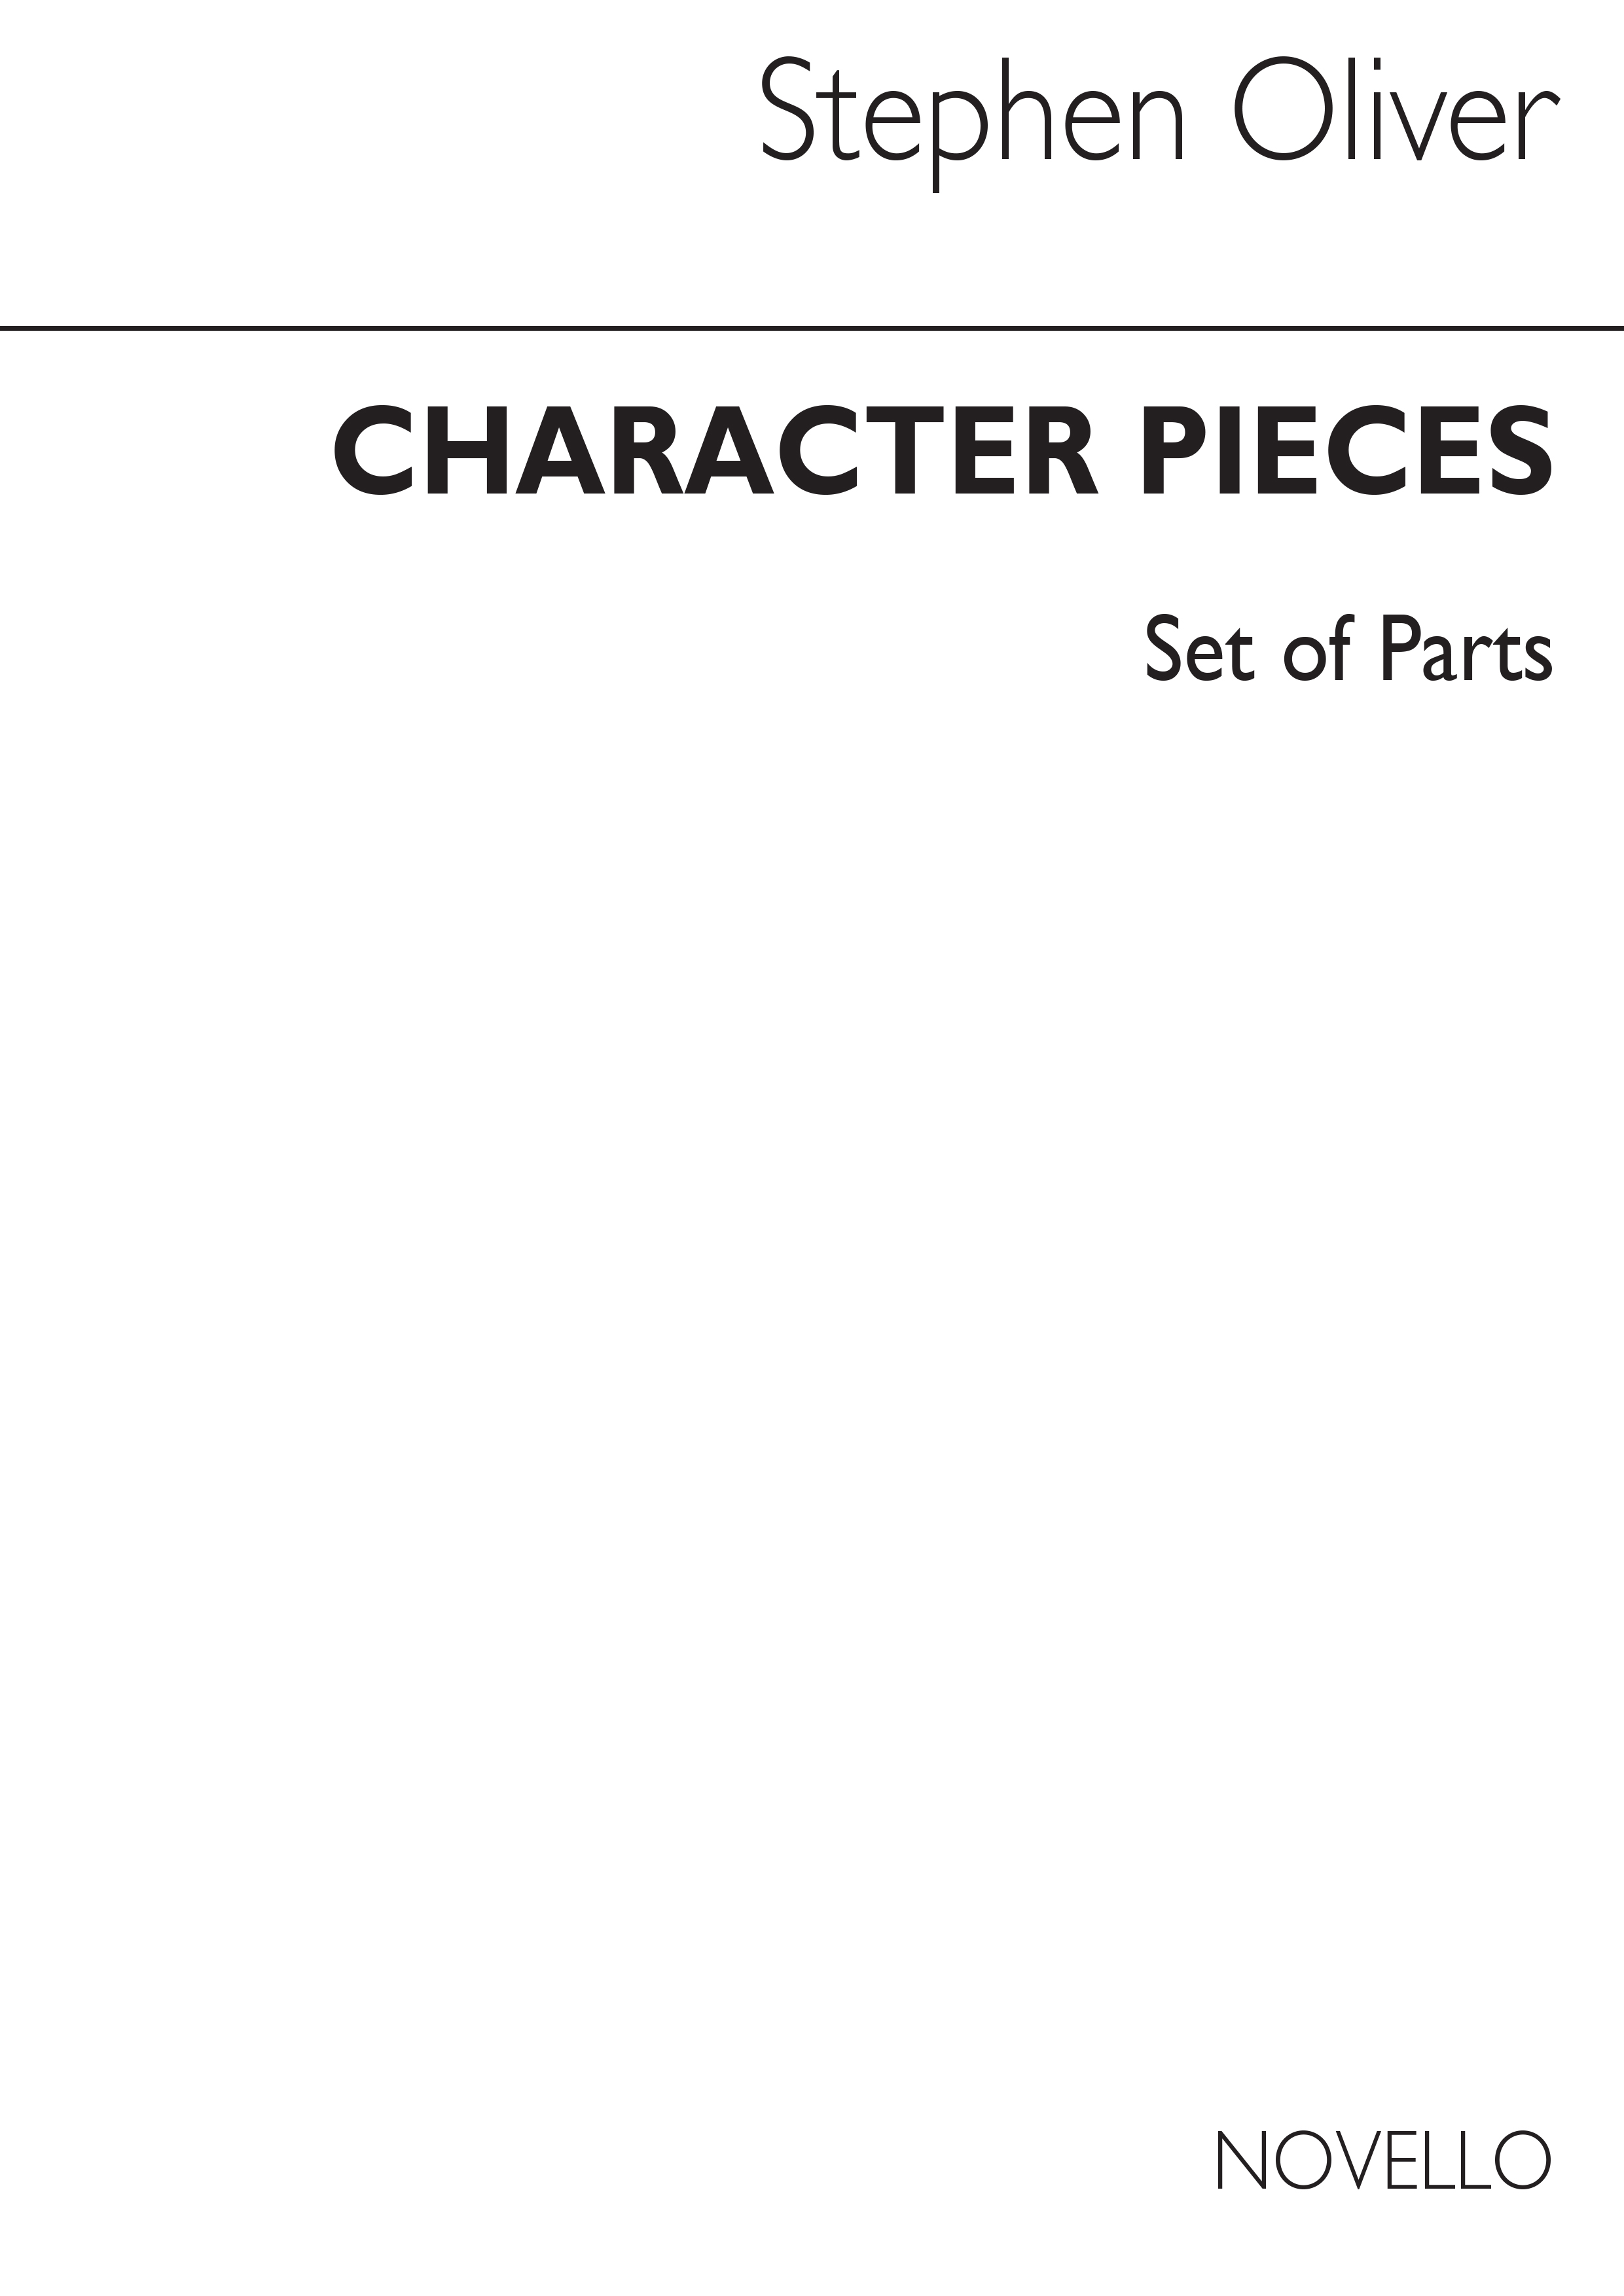 Stephen Oliver: Character Pieces For Wind (Parts)